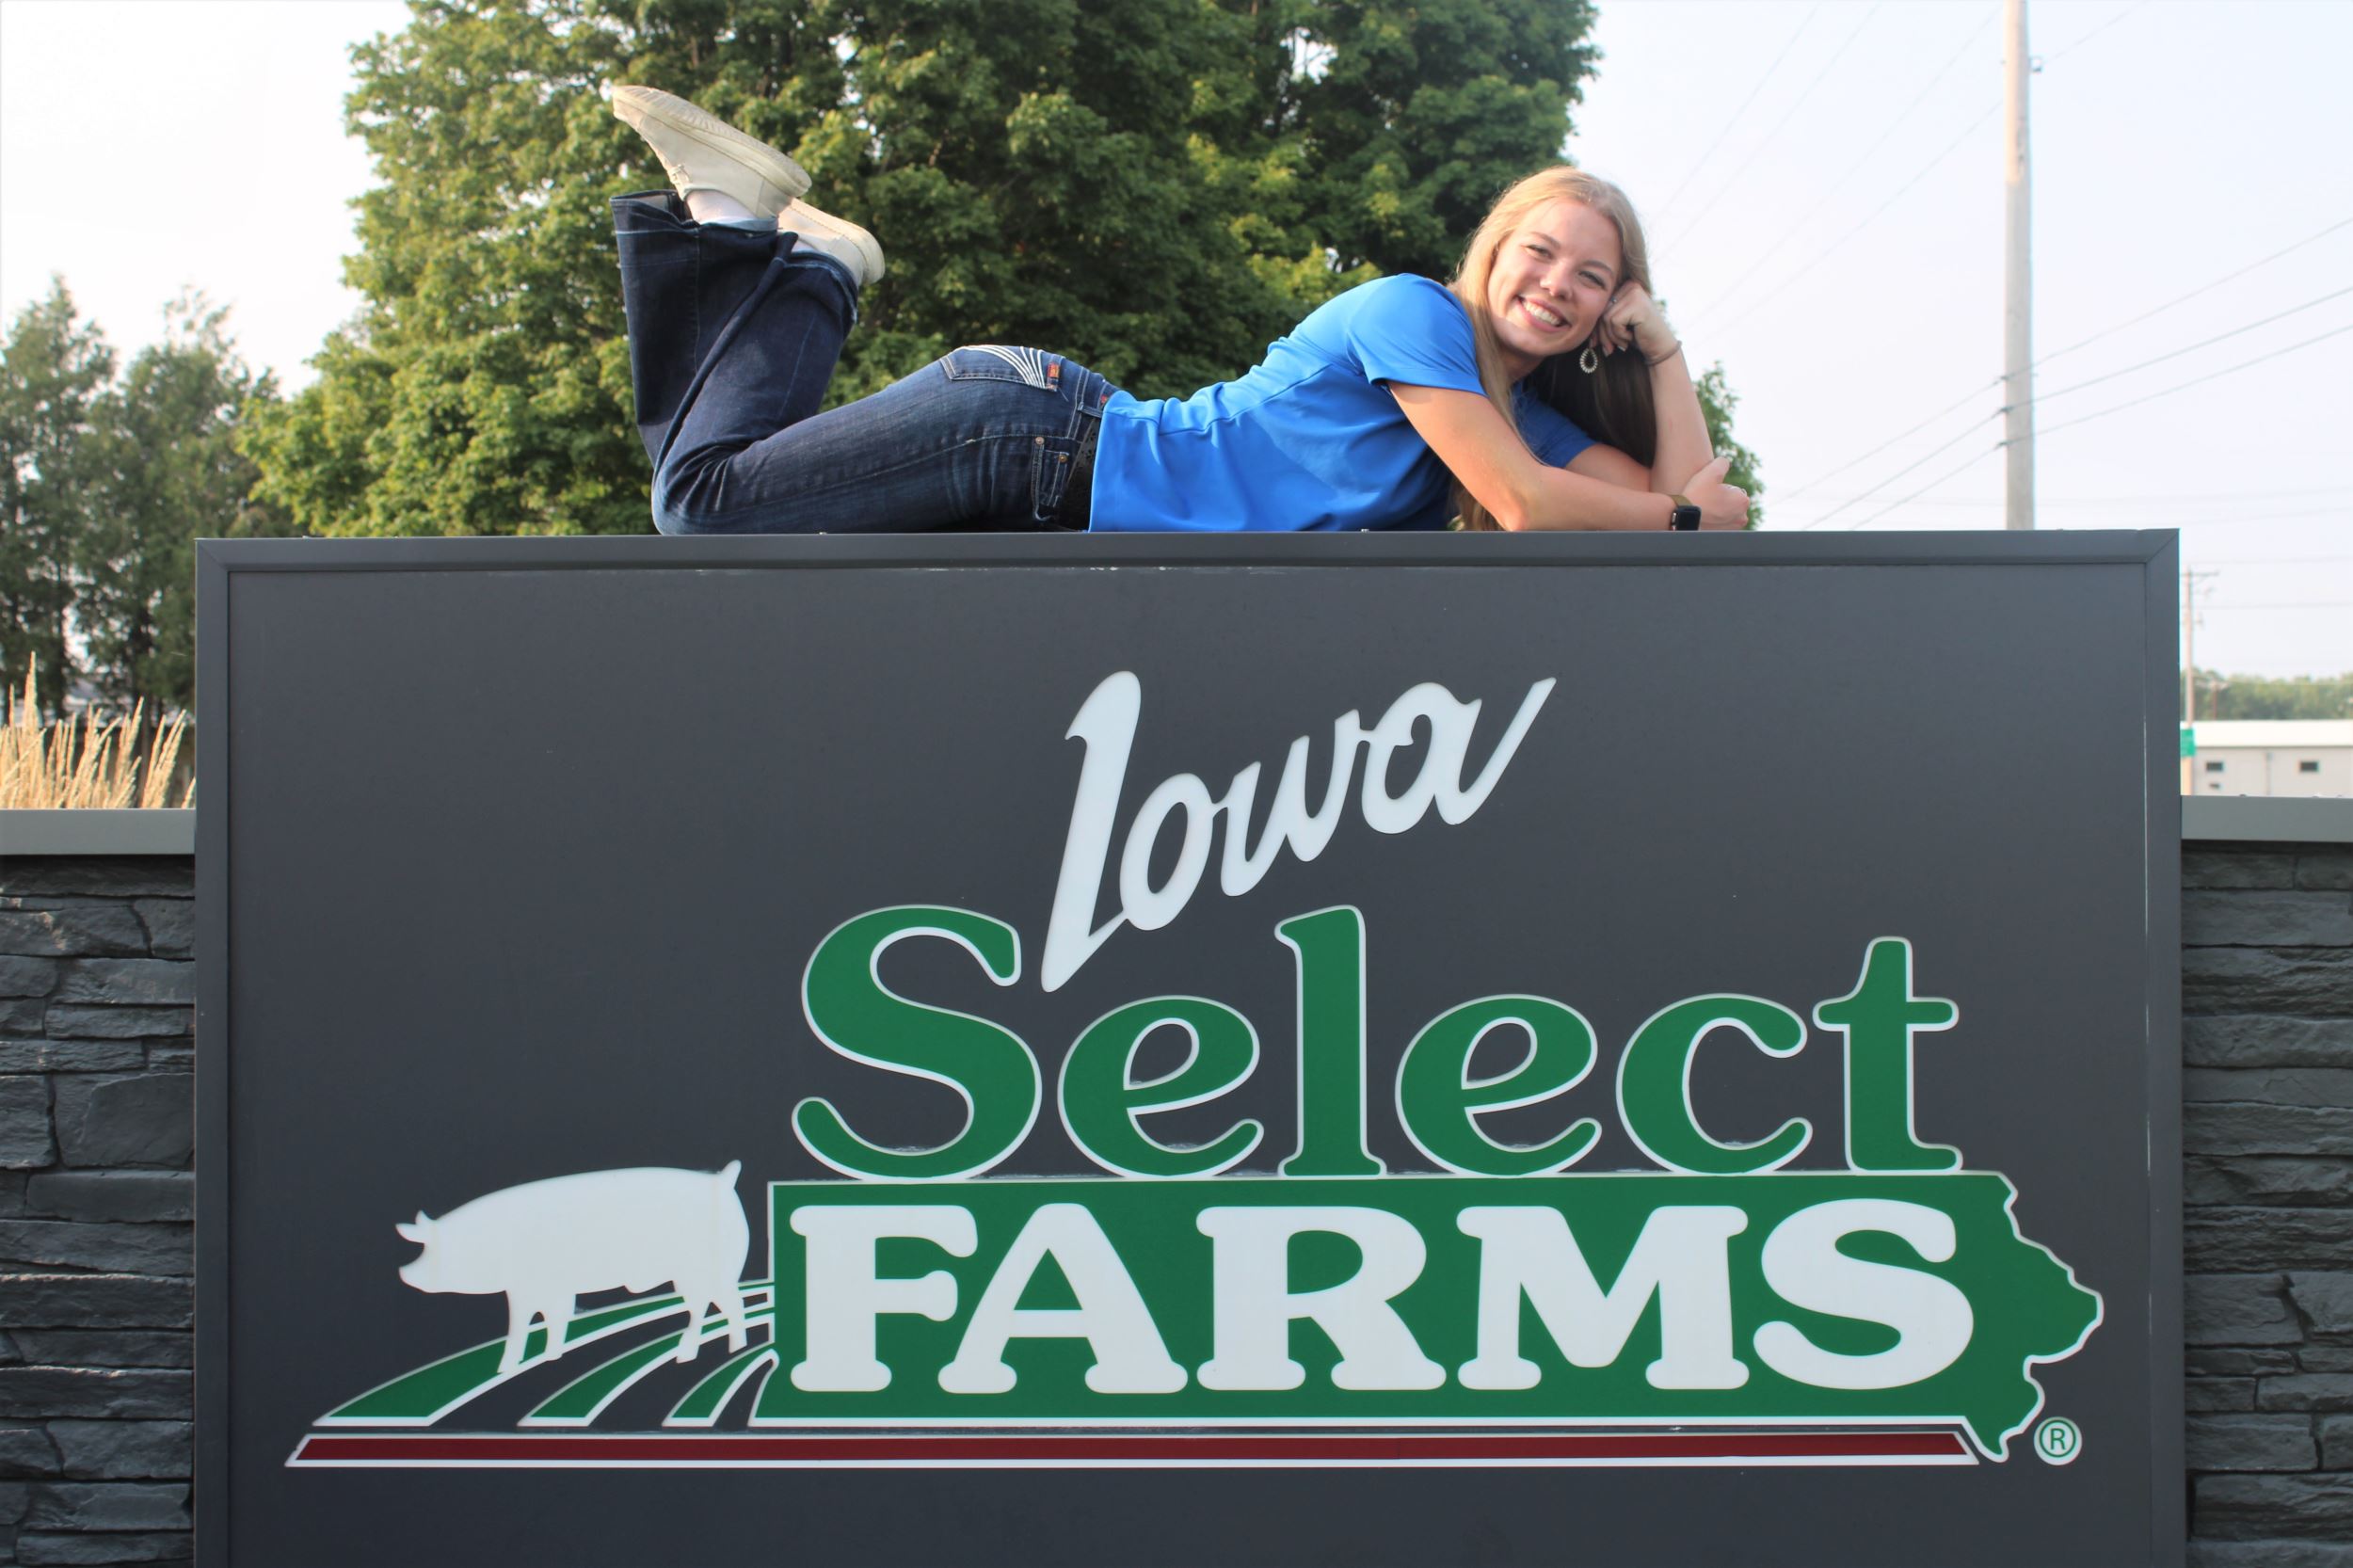 Emily lays on top of the Iowa Select Farms sign.